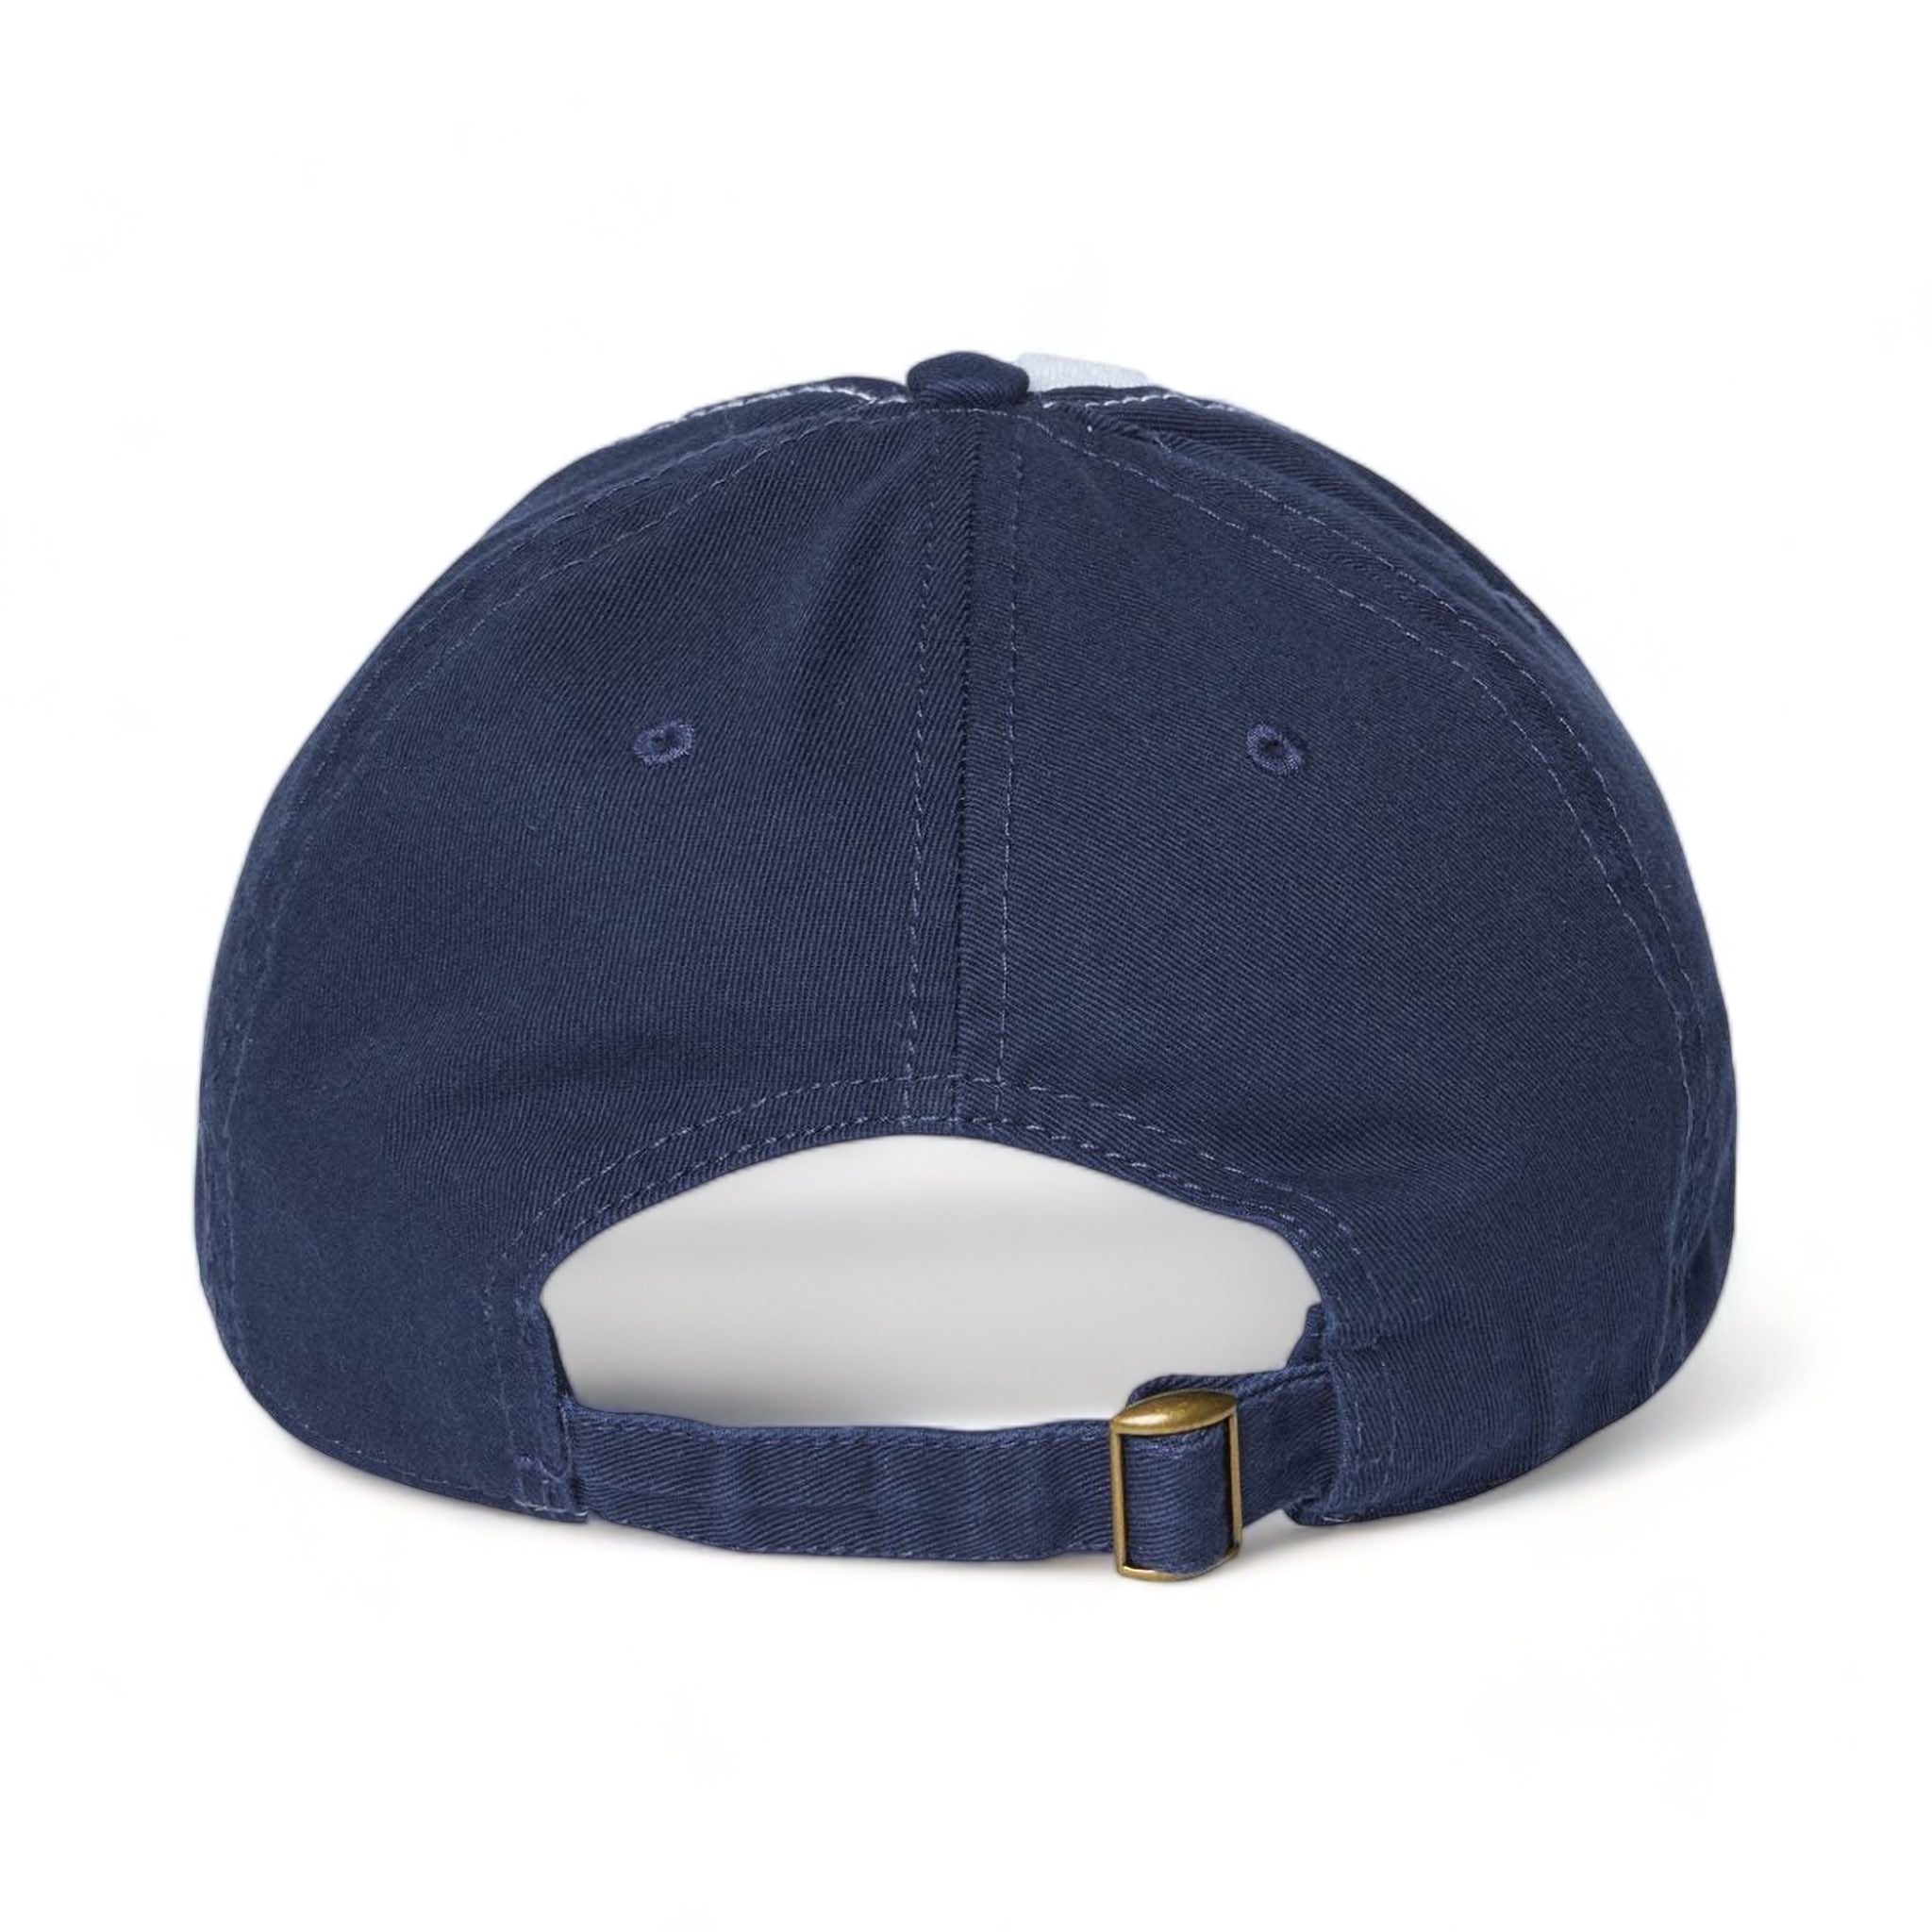 Back view of CAP AMERICA i1002 custom hat in white and light navy